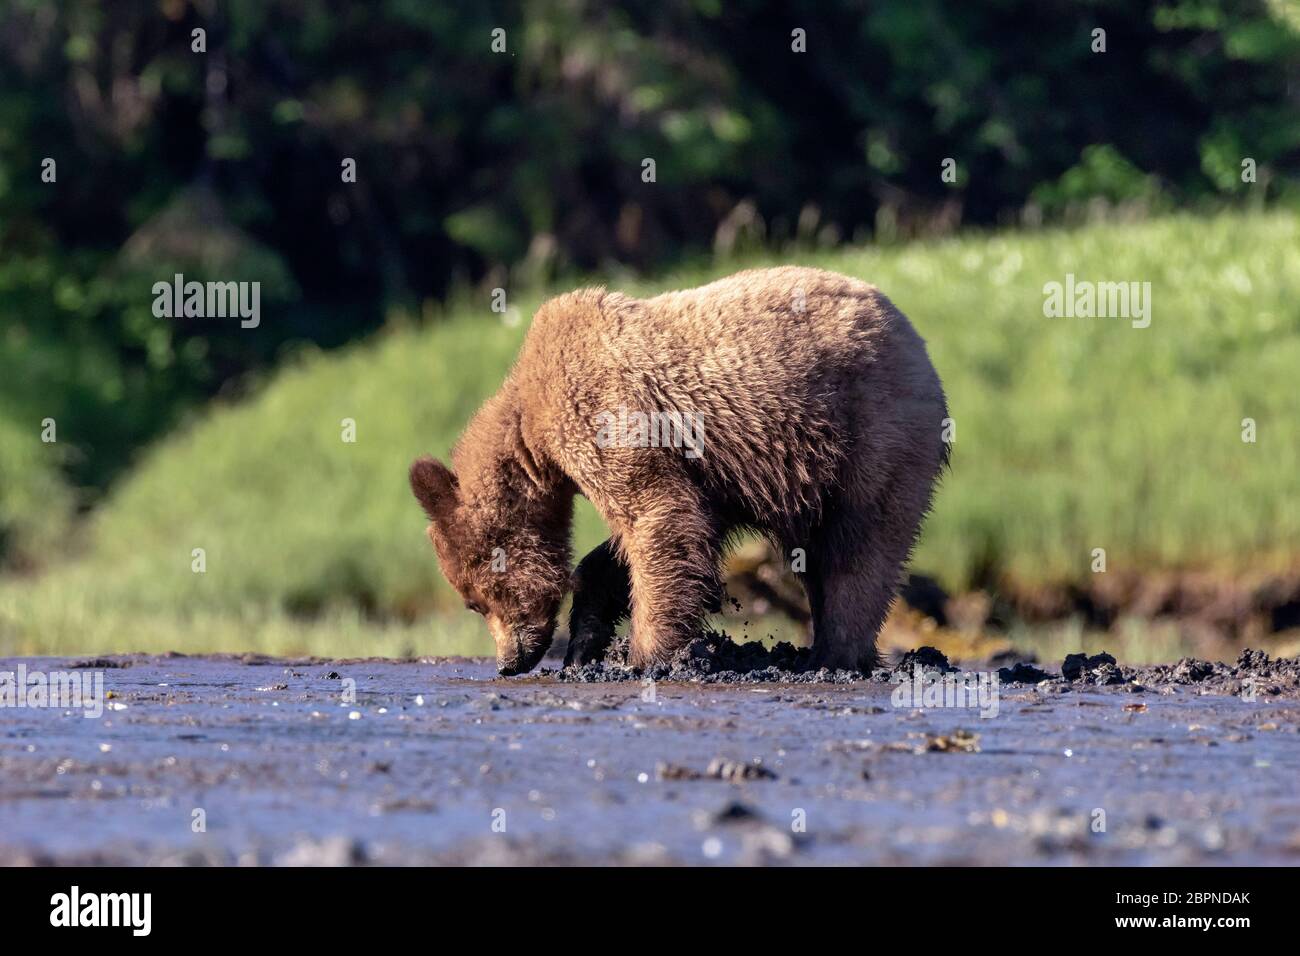 Large grizzly bear digging up clams on the beach, Khutzeymateen Inlet, BC Stock Photo